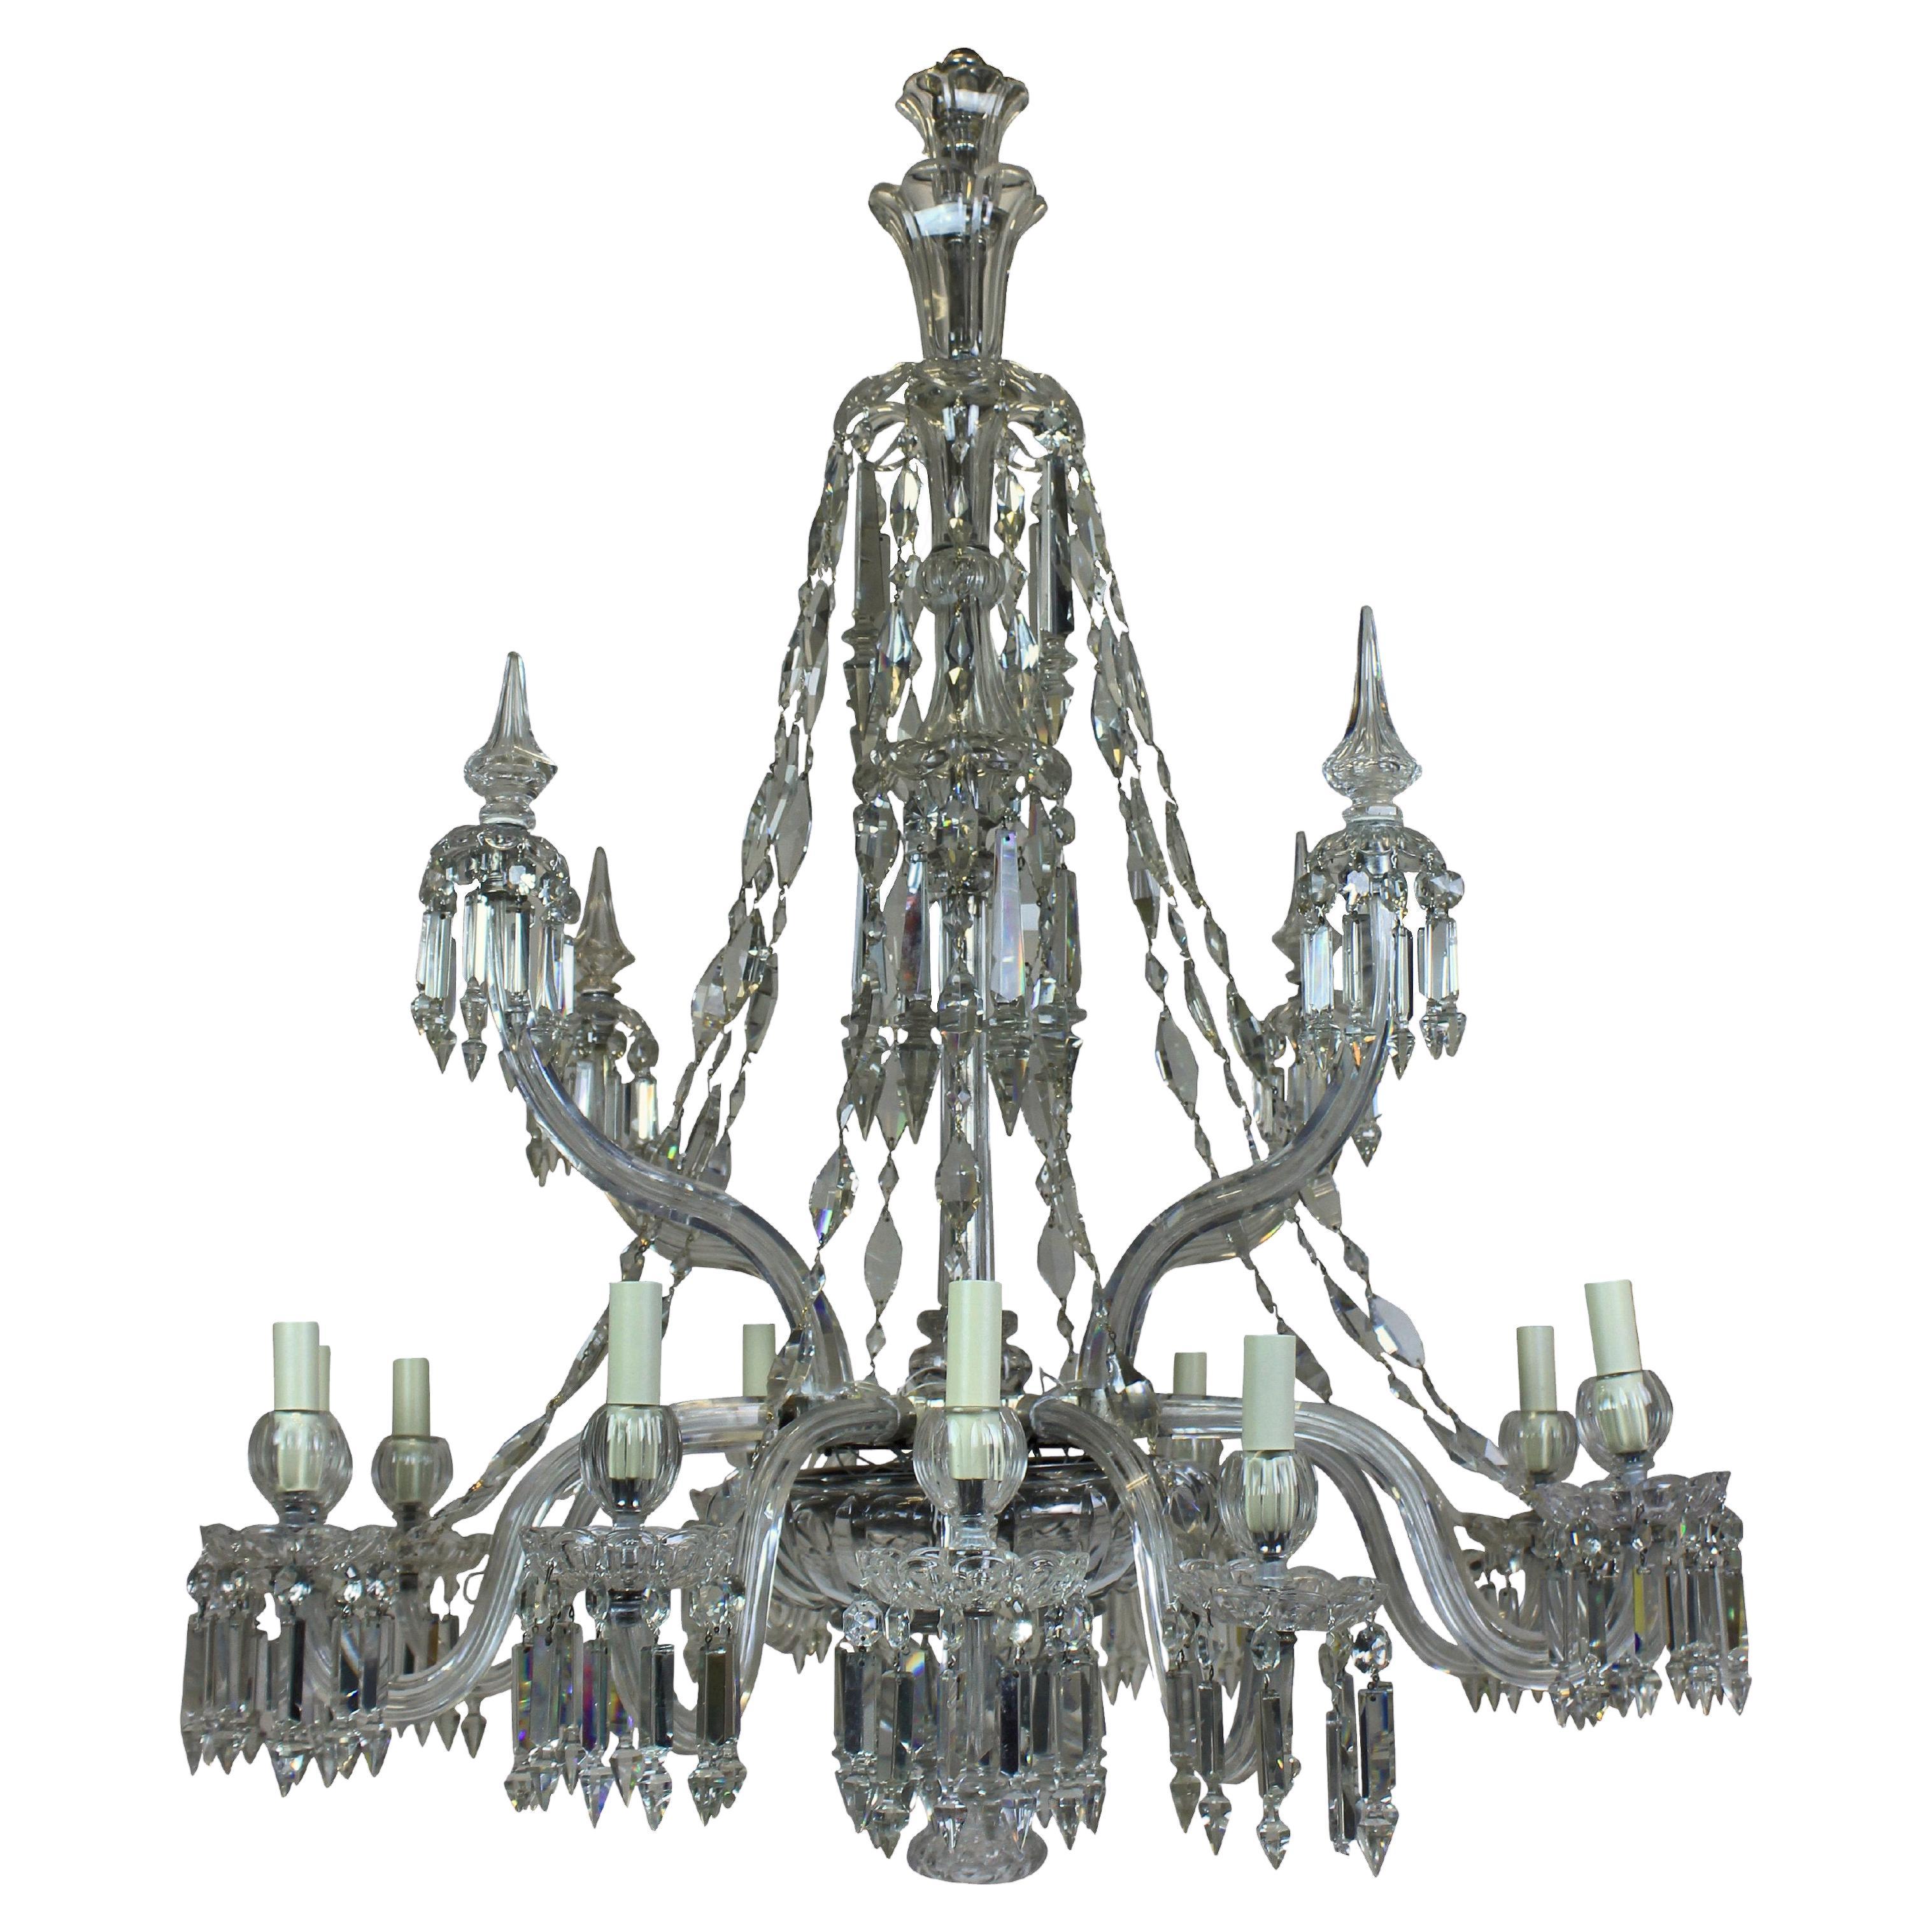 Large Twelve Arm English Cut Glass Chandelier By Osler